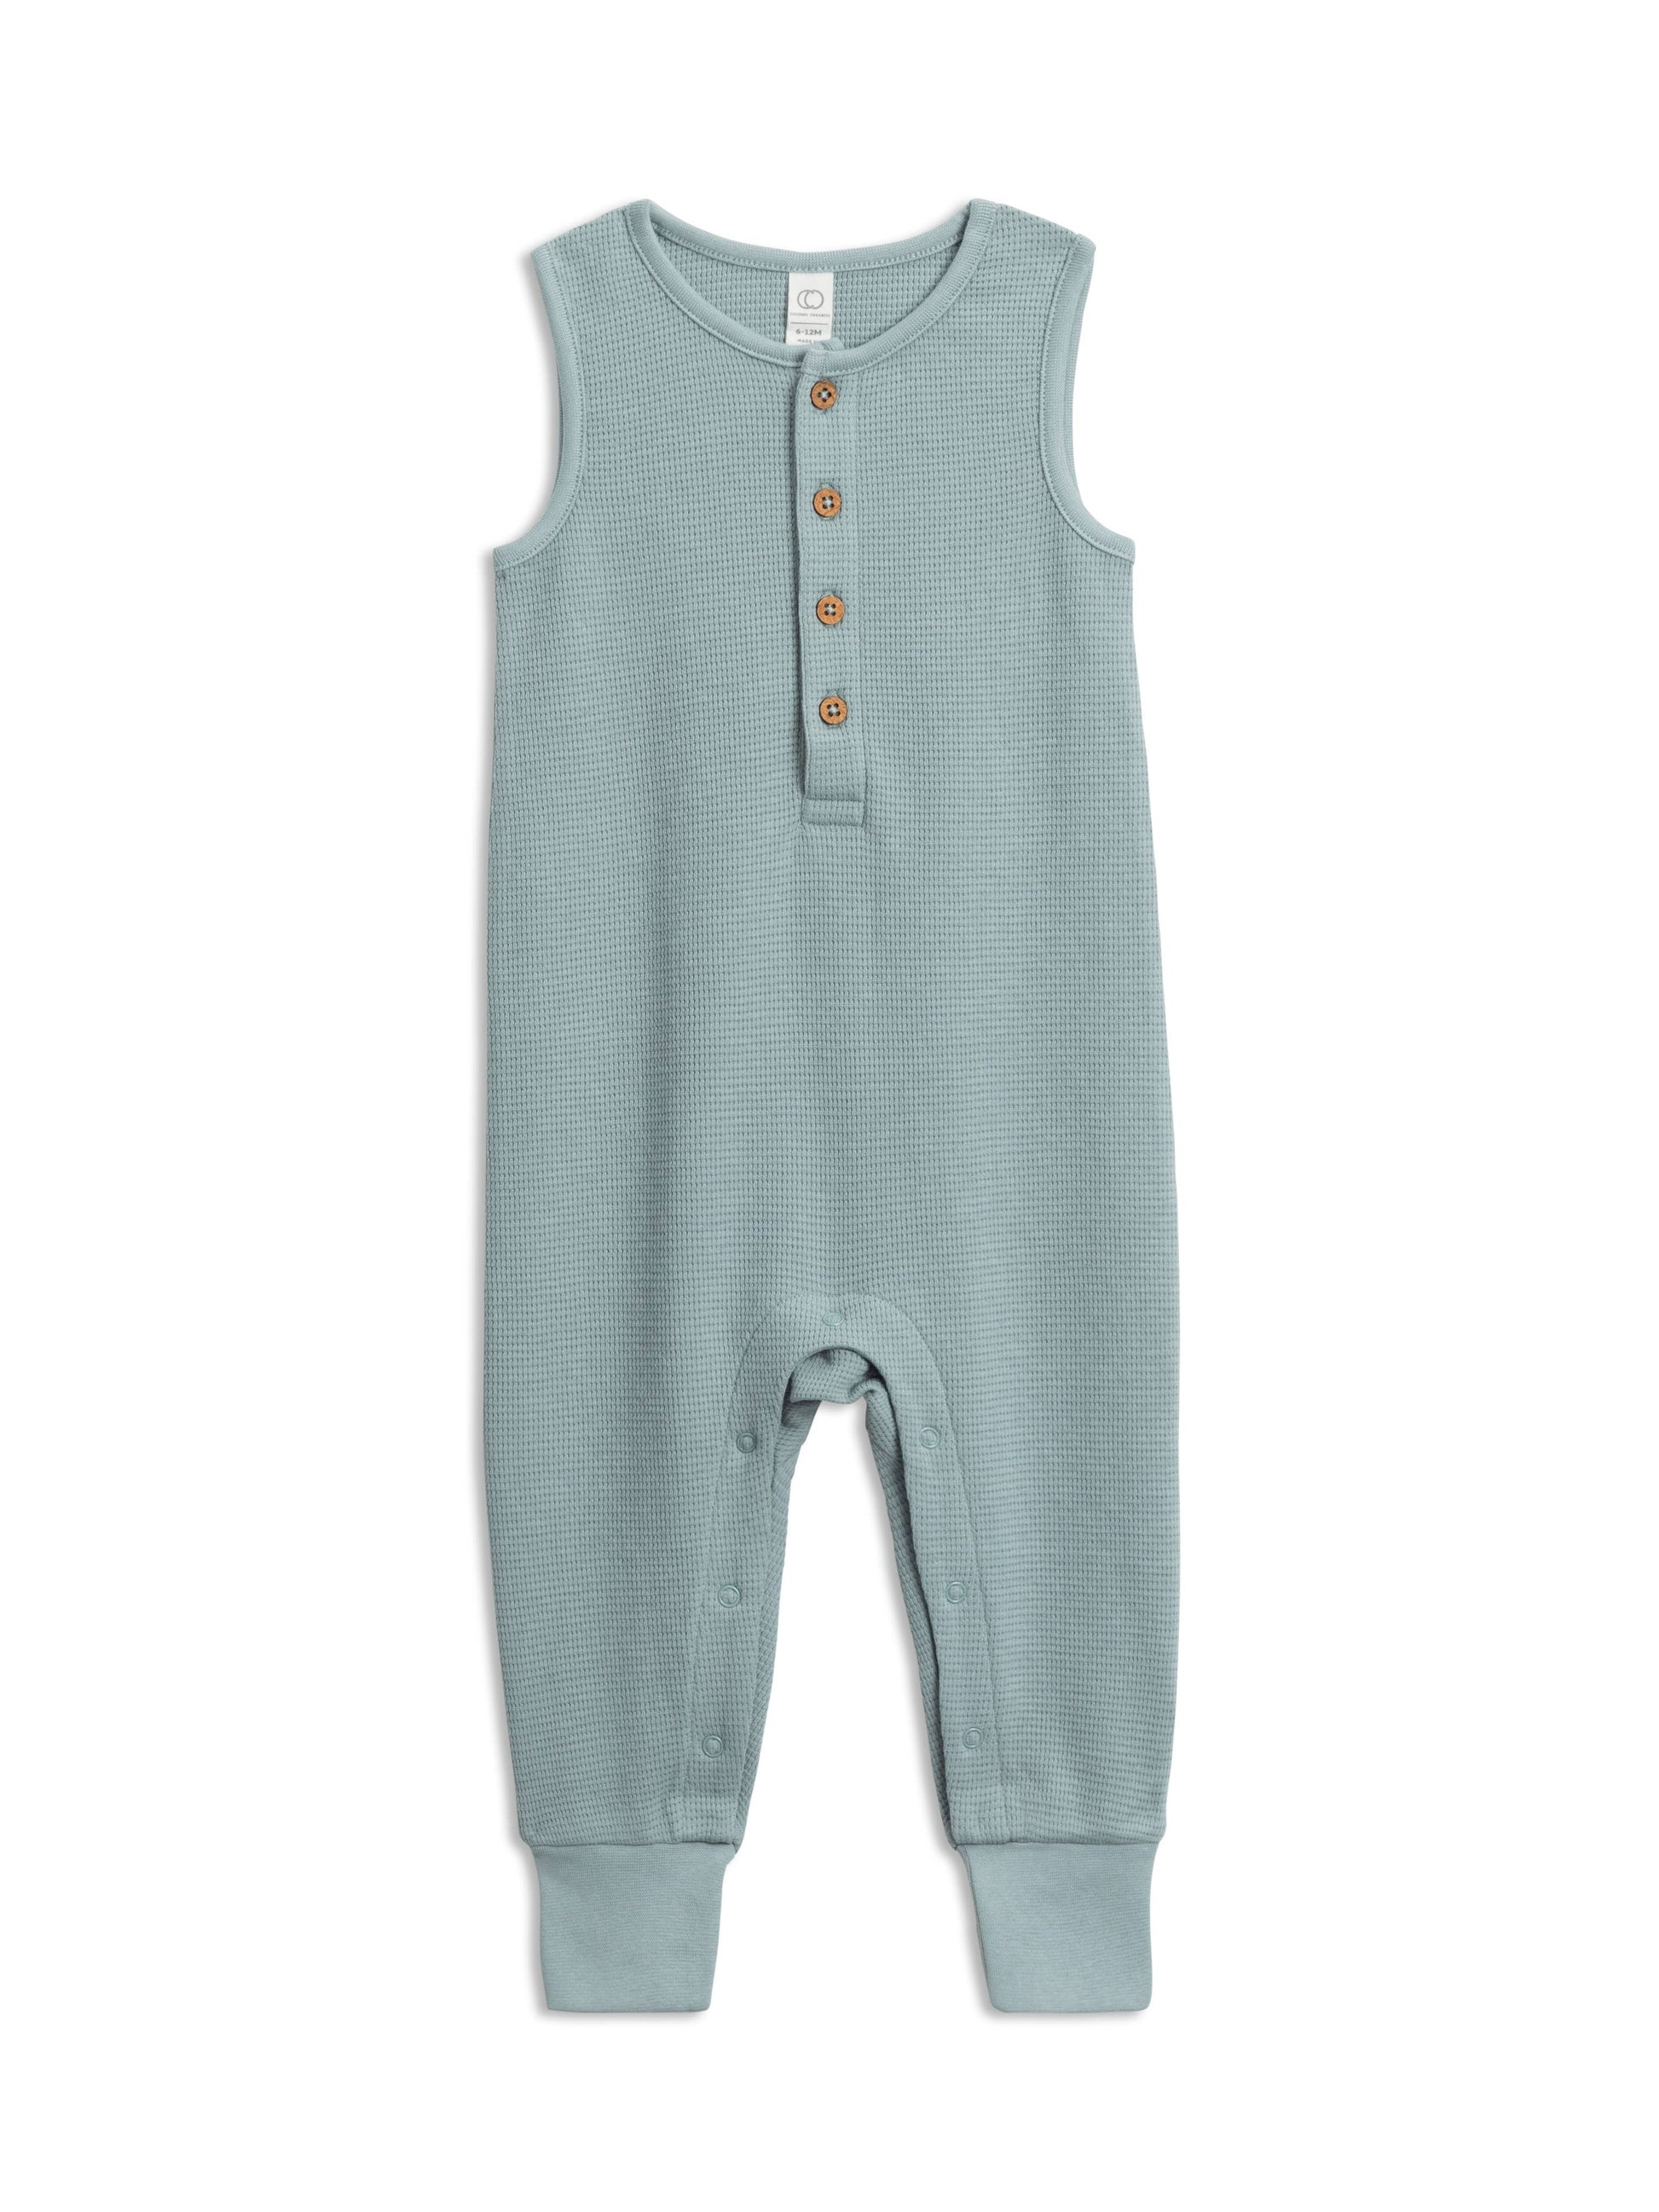 Our Wade Romper is made from 100% organic waffled cotton, and has eco-friendly coconut buttons and nickel-free snaps to make getting dressed effortless. Made of 100%